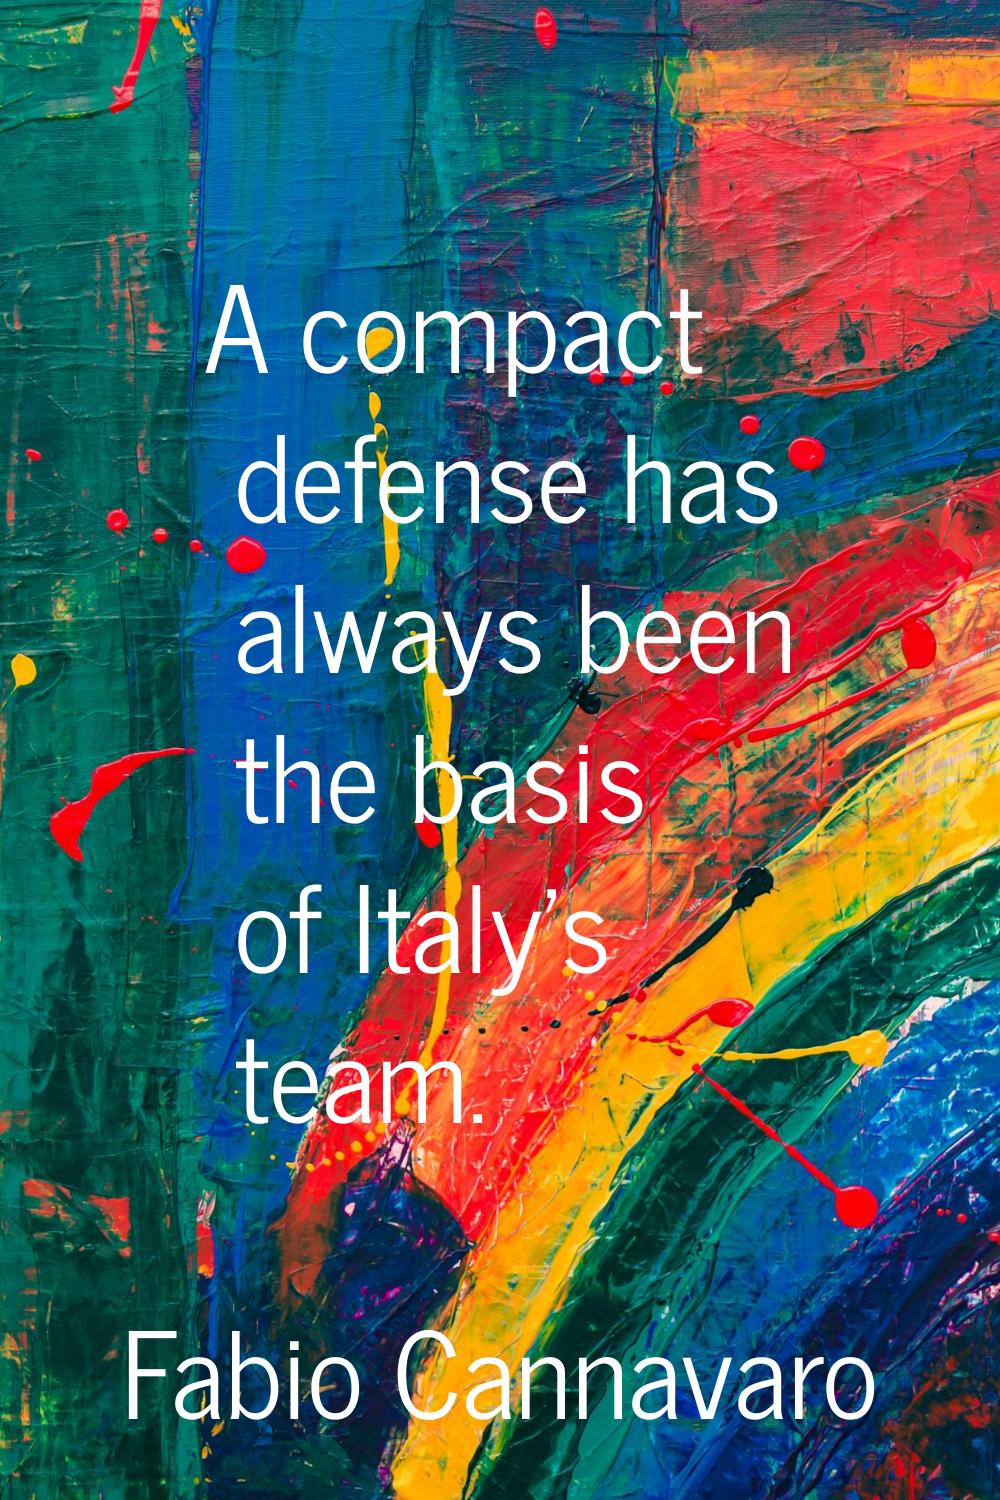 A compact defense has always been the basis of Italy's team.